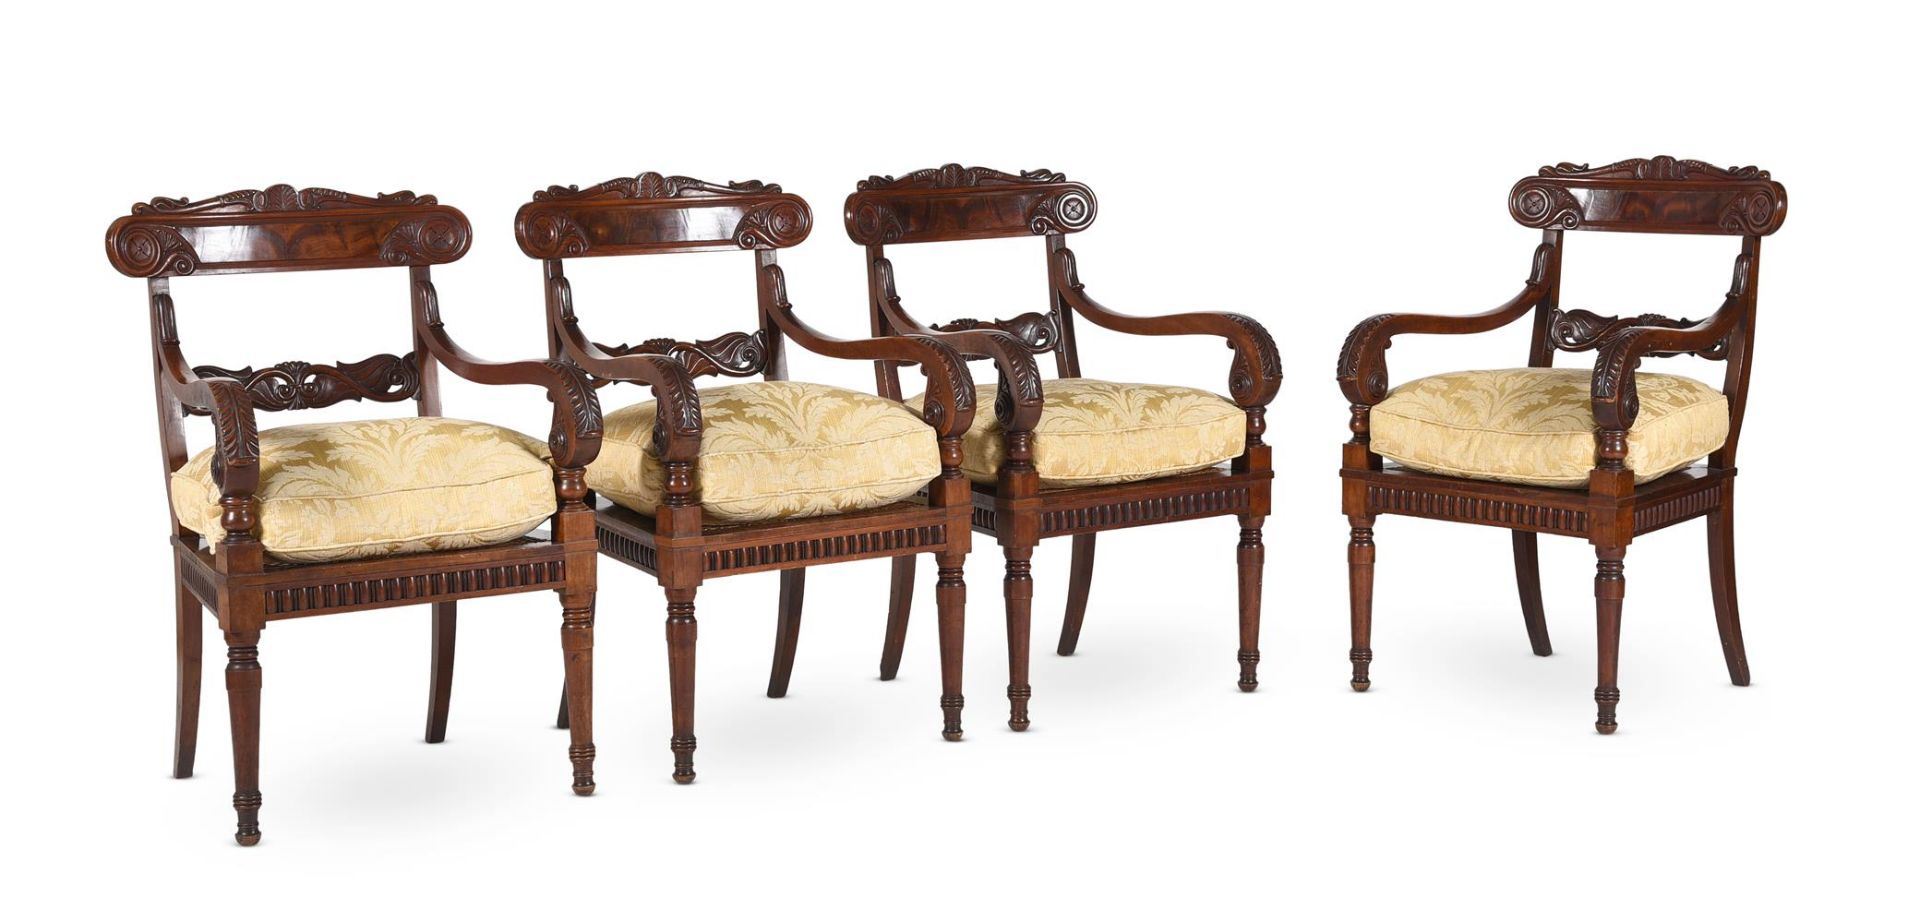 A SET OF FOUR WILLIAM IV MAHOGANY ARMCHAIRS, IN THE MANNER OF GILLOWS, CIRCA 1835 - Image 2 of 9